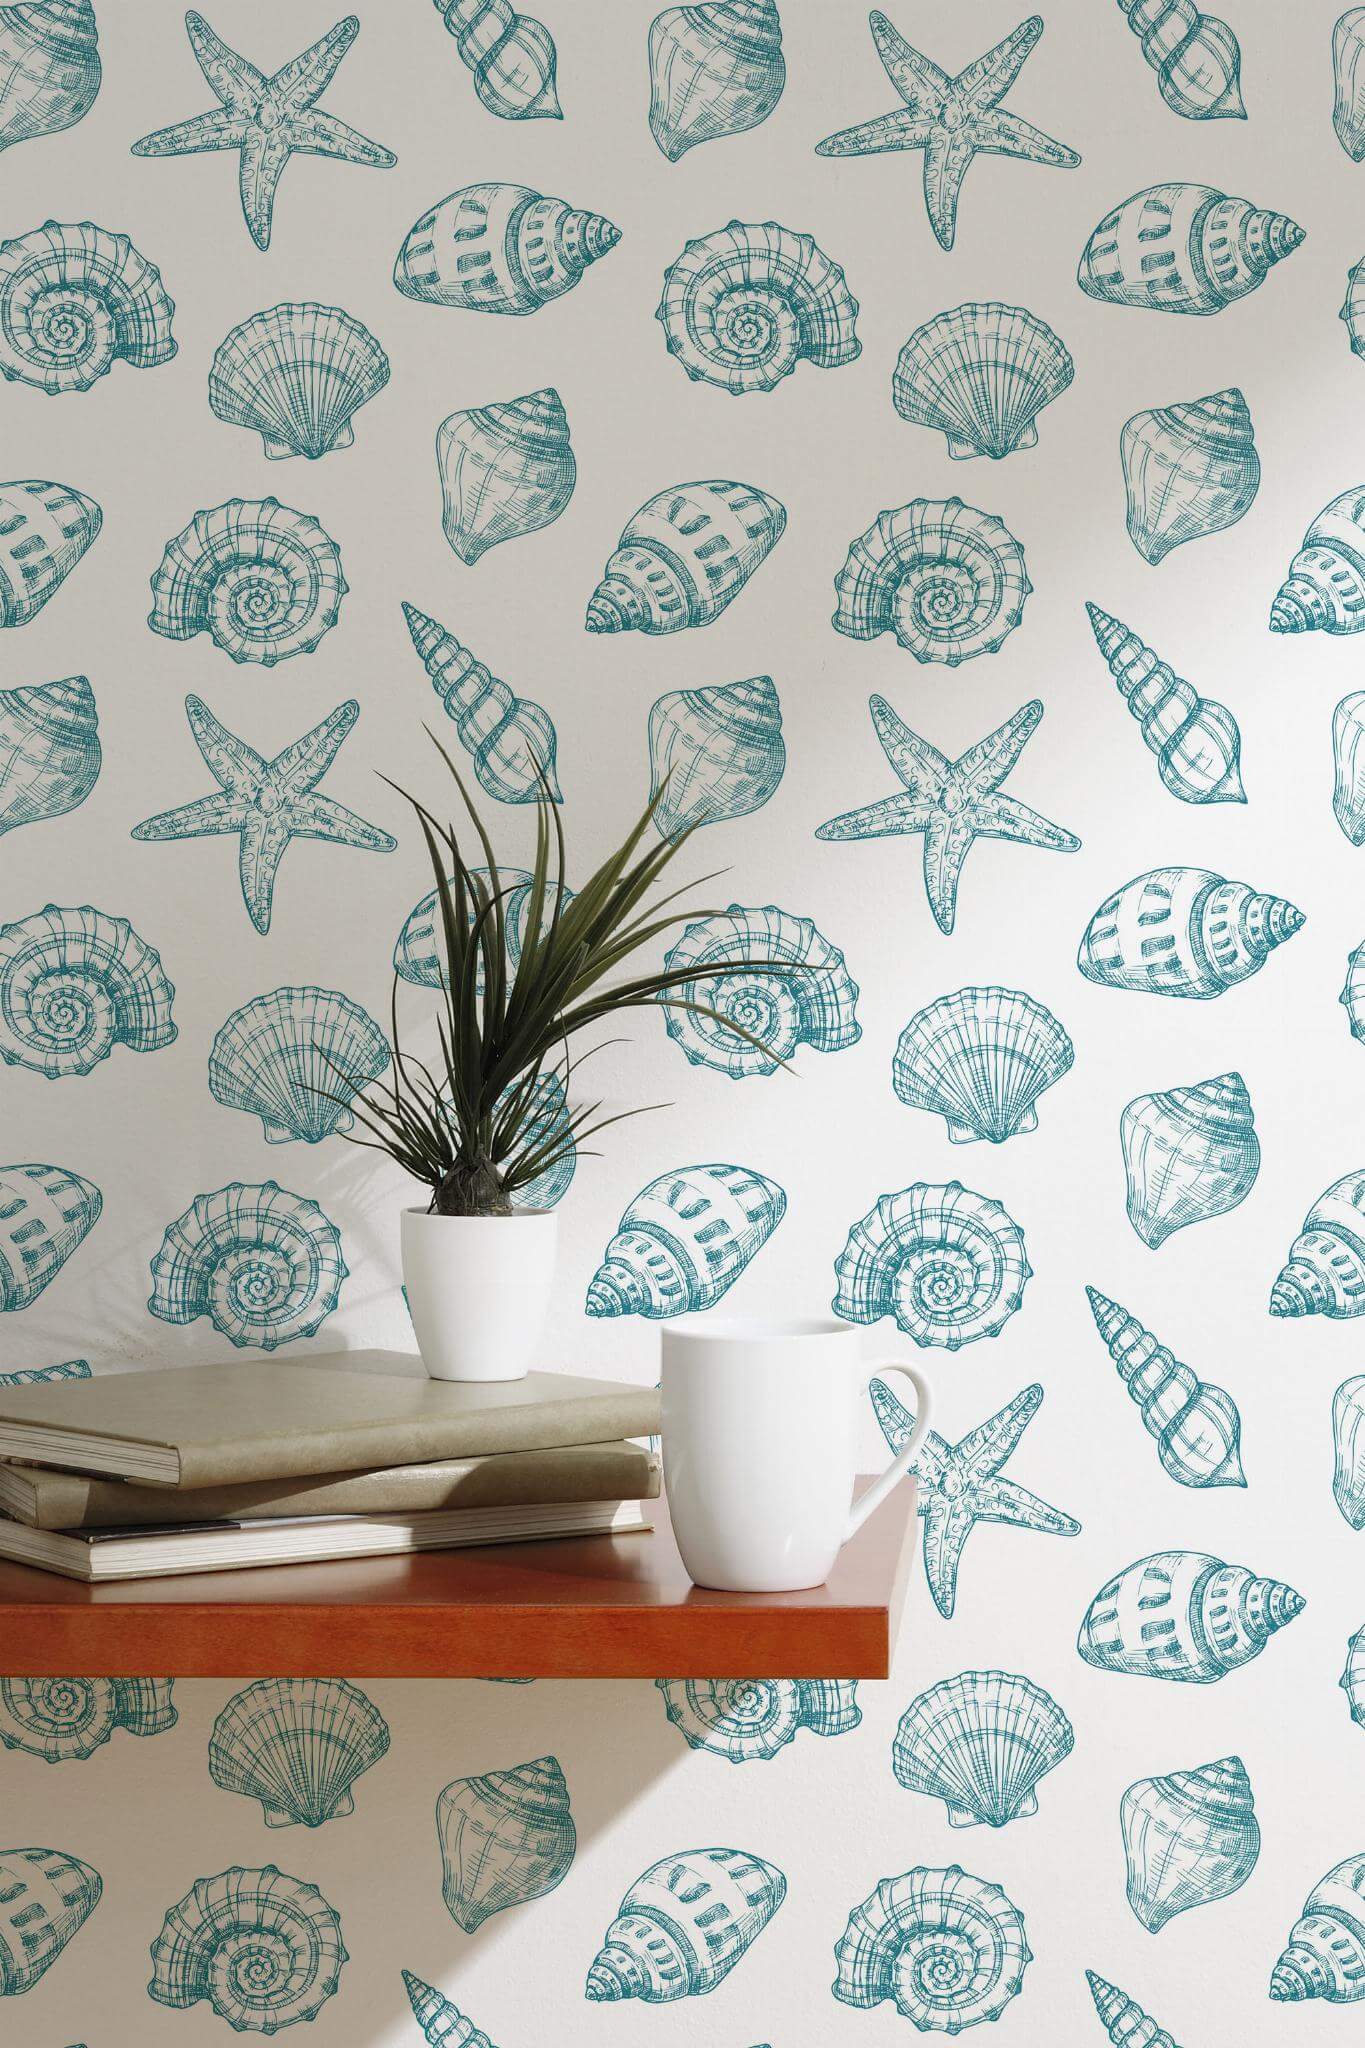 Seashell Wallpaper - Peel and Stick or Non-Pasted